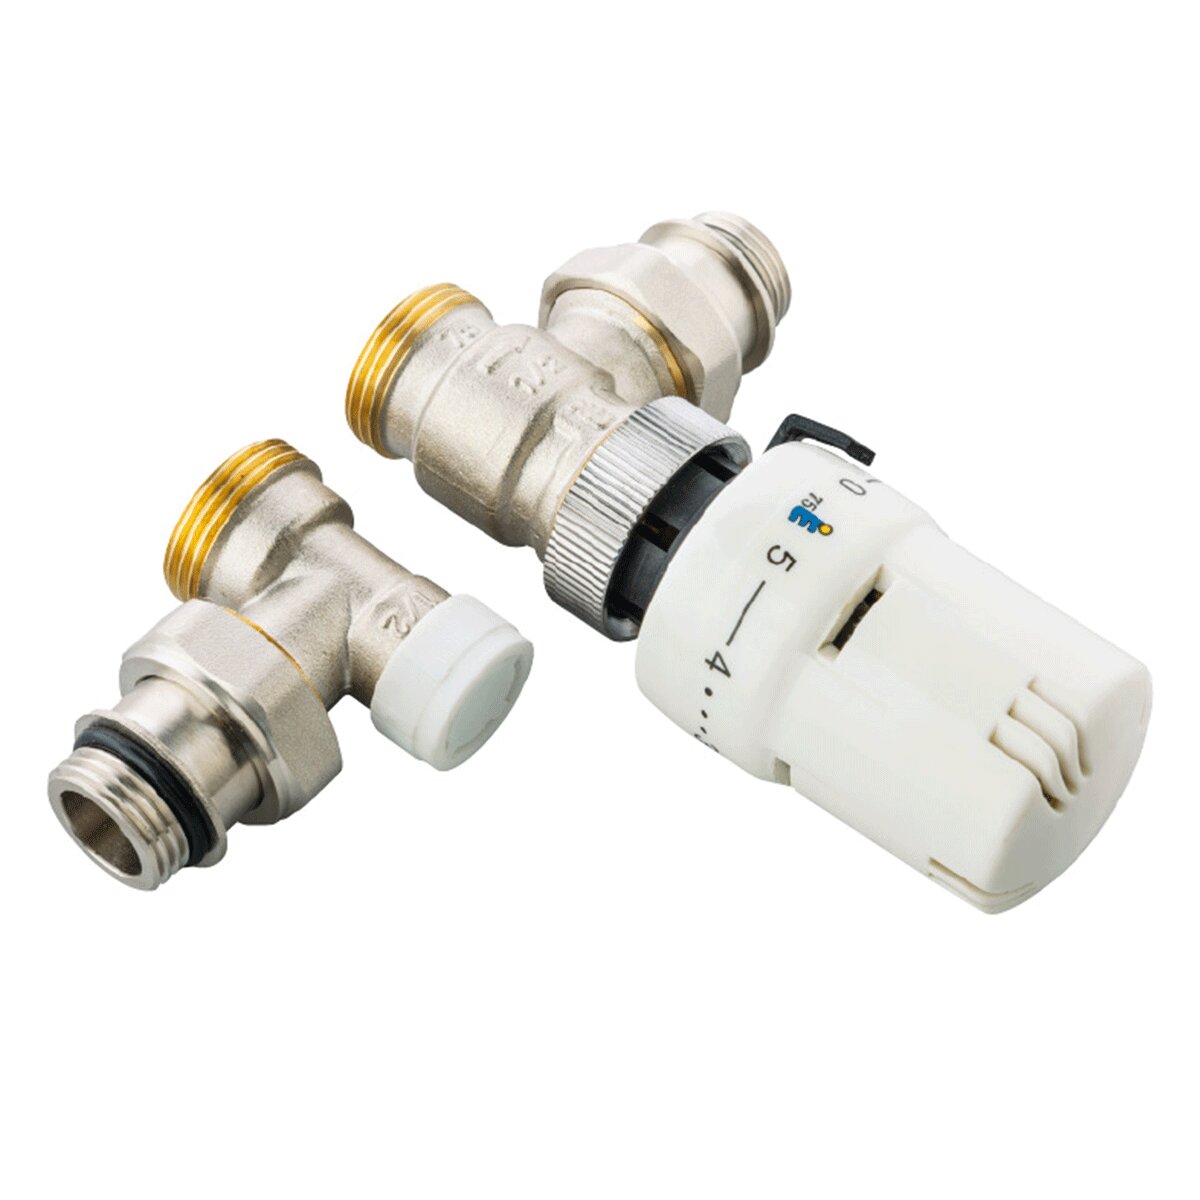 Ercos thermostatic kit with valve and square lockshield type 1/2" iron connection